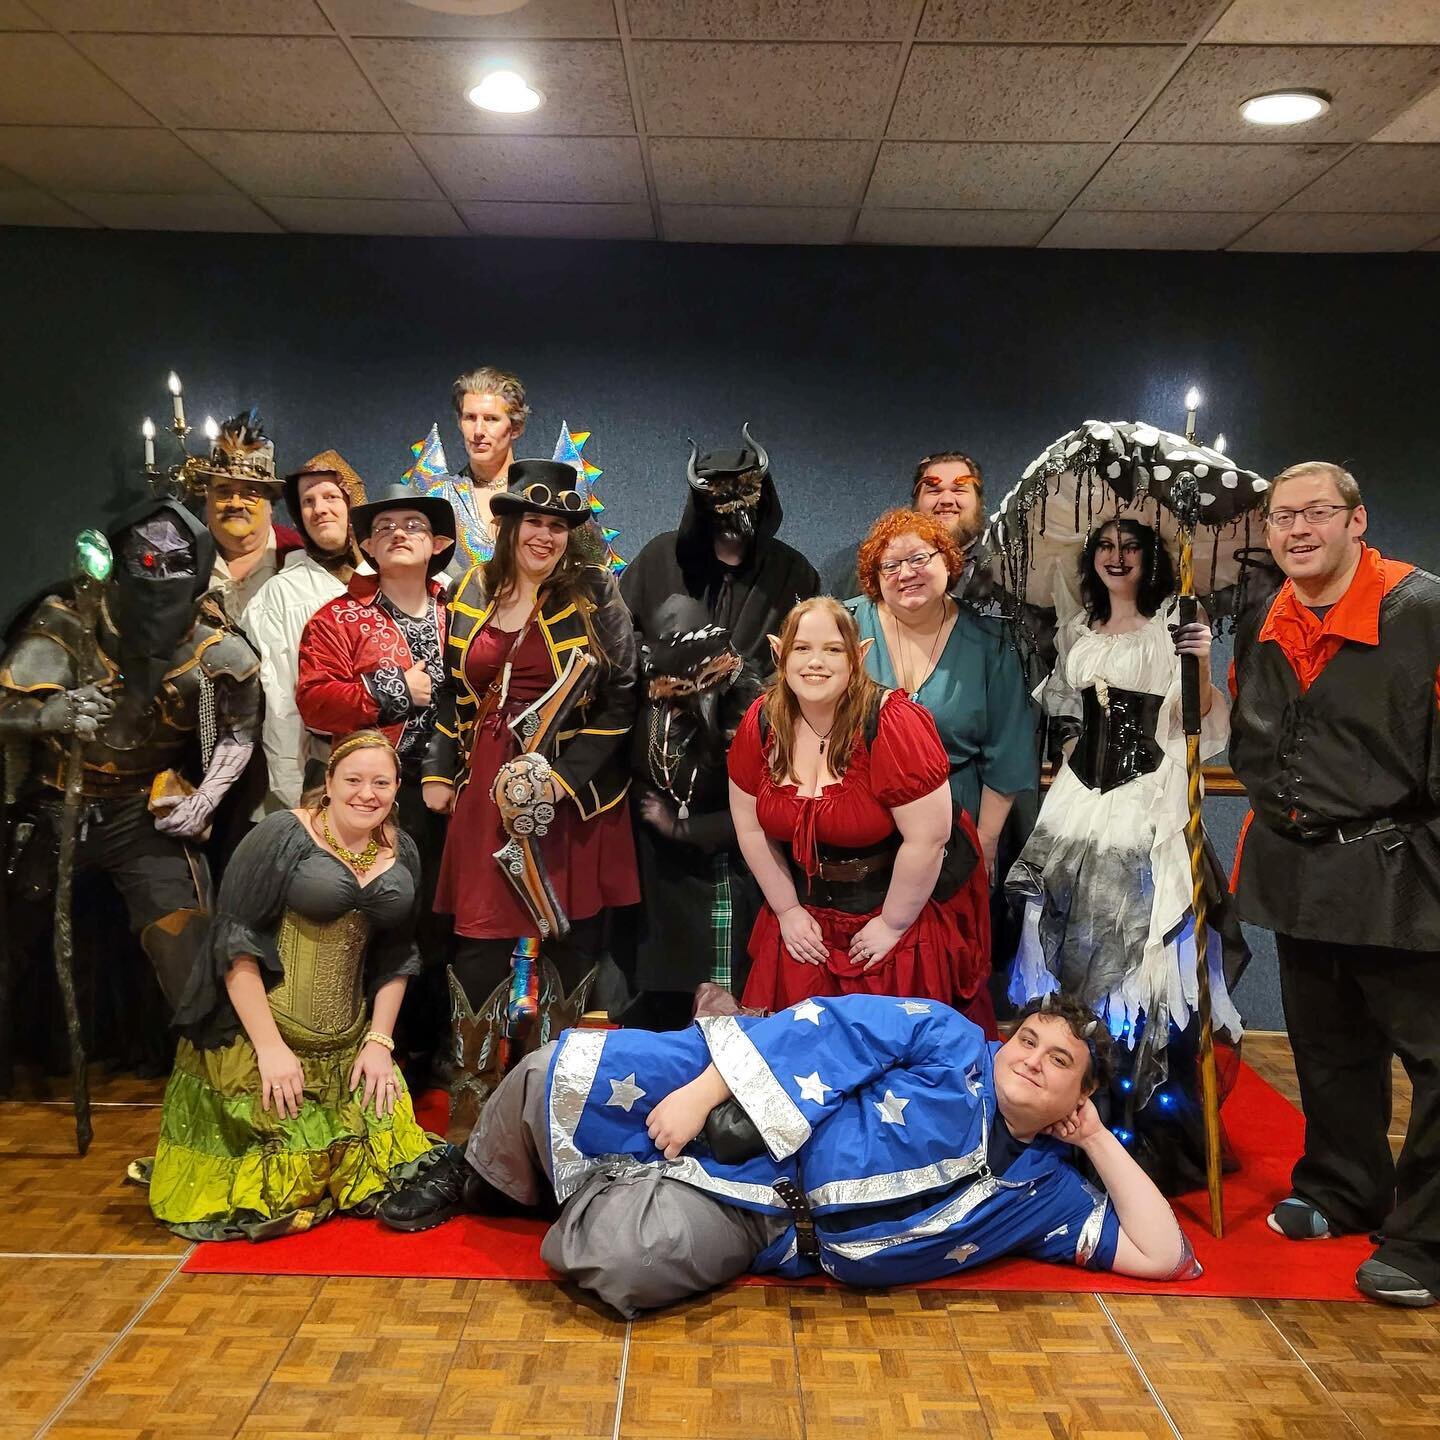 Another parlor escapade in the books, featuring diplomacy talks and our favorite sparkling Host. Off season at Alliance Ascension looks pretty fancy!

#larp #liveactionroleplay #larplife #larpcostume #larpcommunity #larplife #larping #larpgirl #larpa